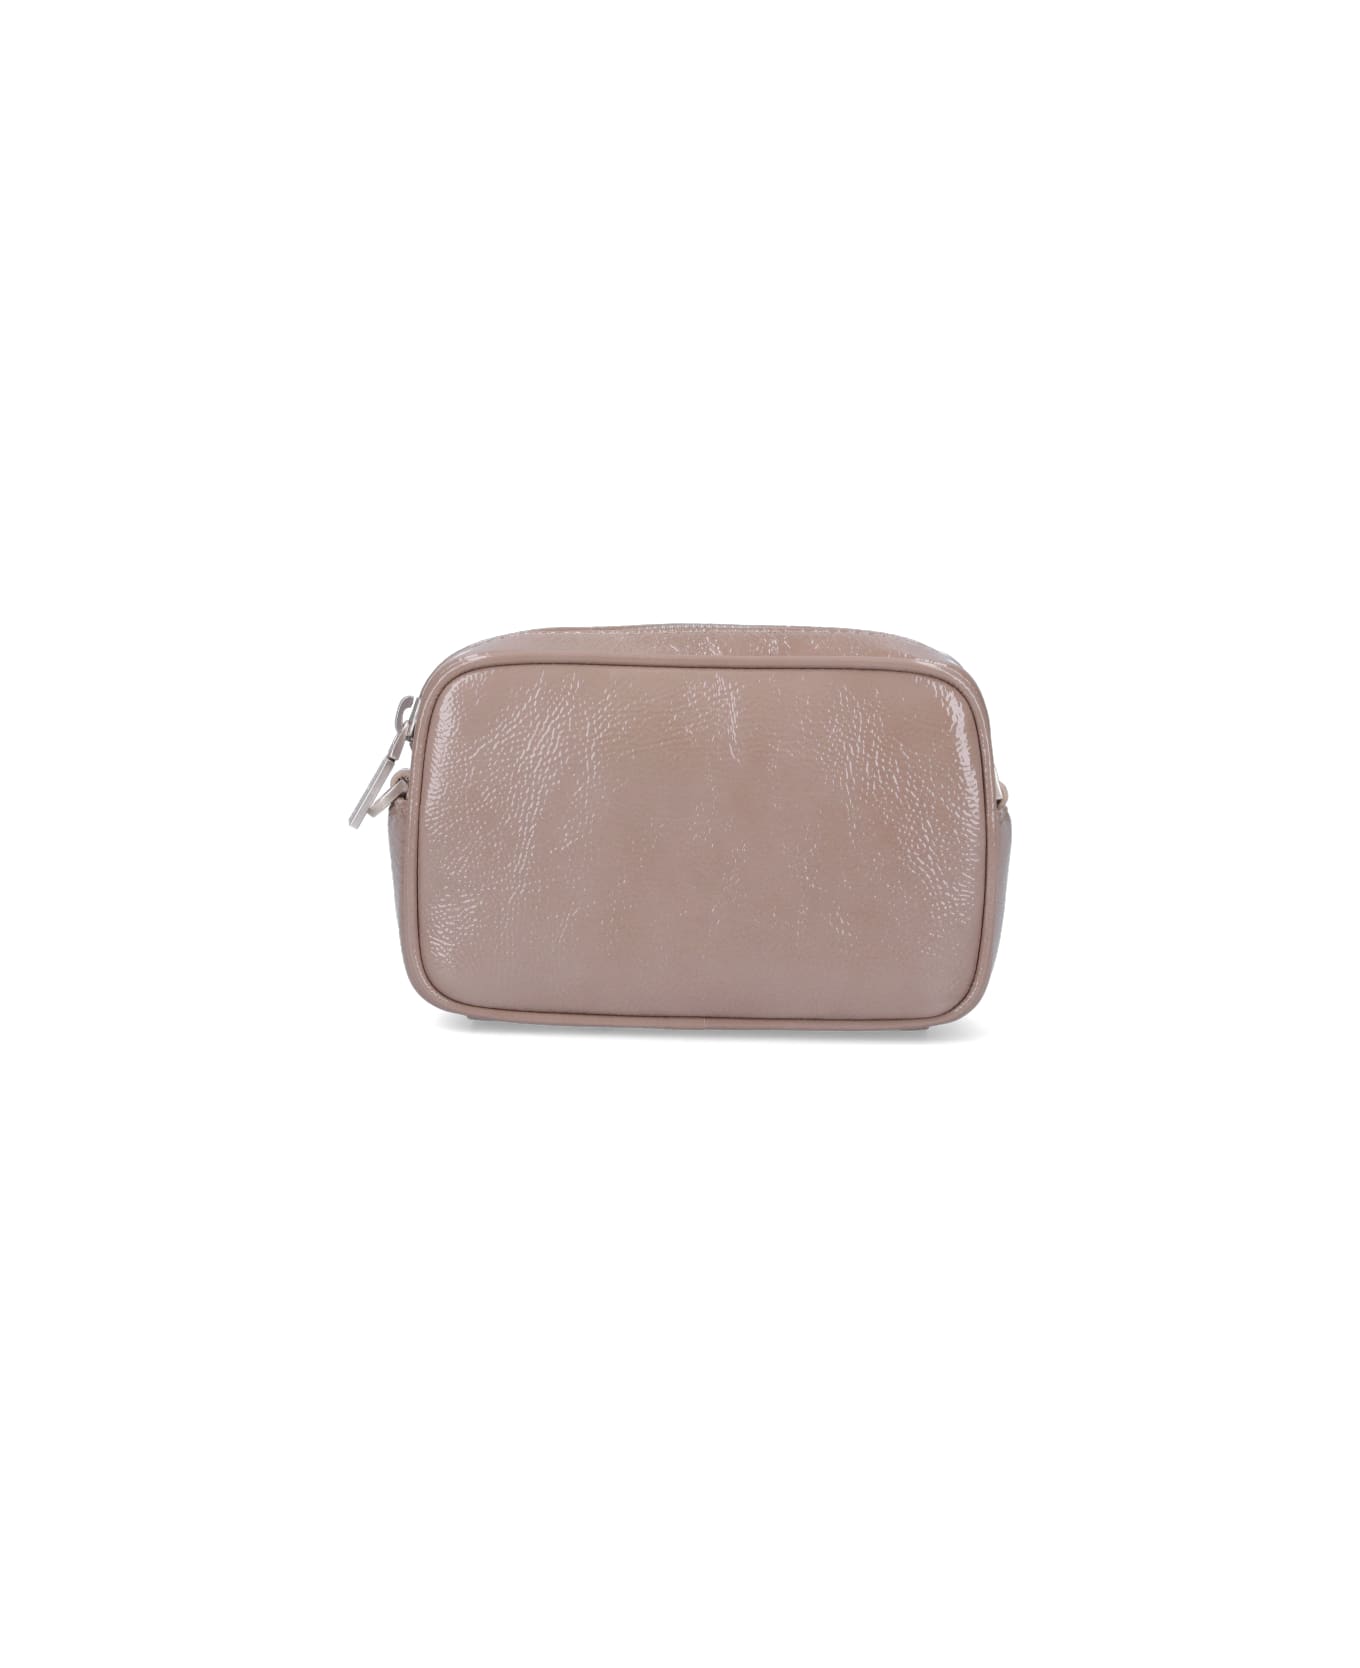 Golden Goose Star Crossbody Bag In Dove-gray Leather - Taupe クラッチバッグ